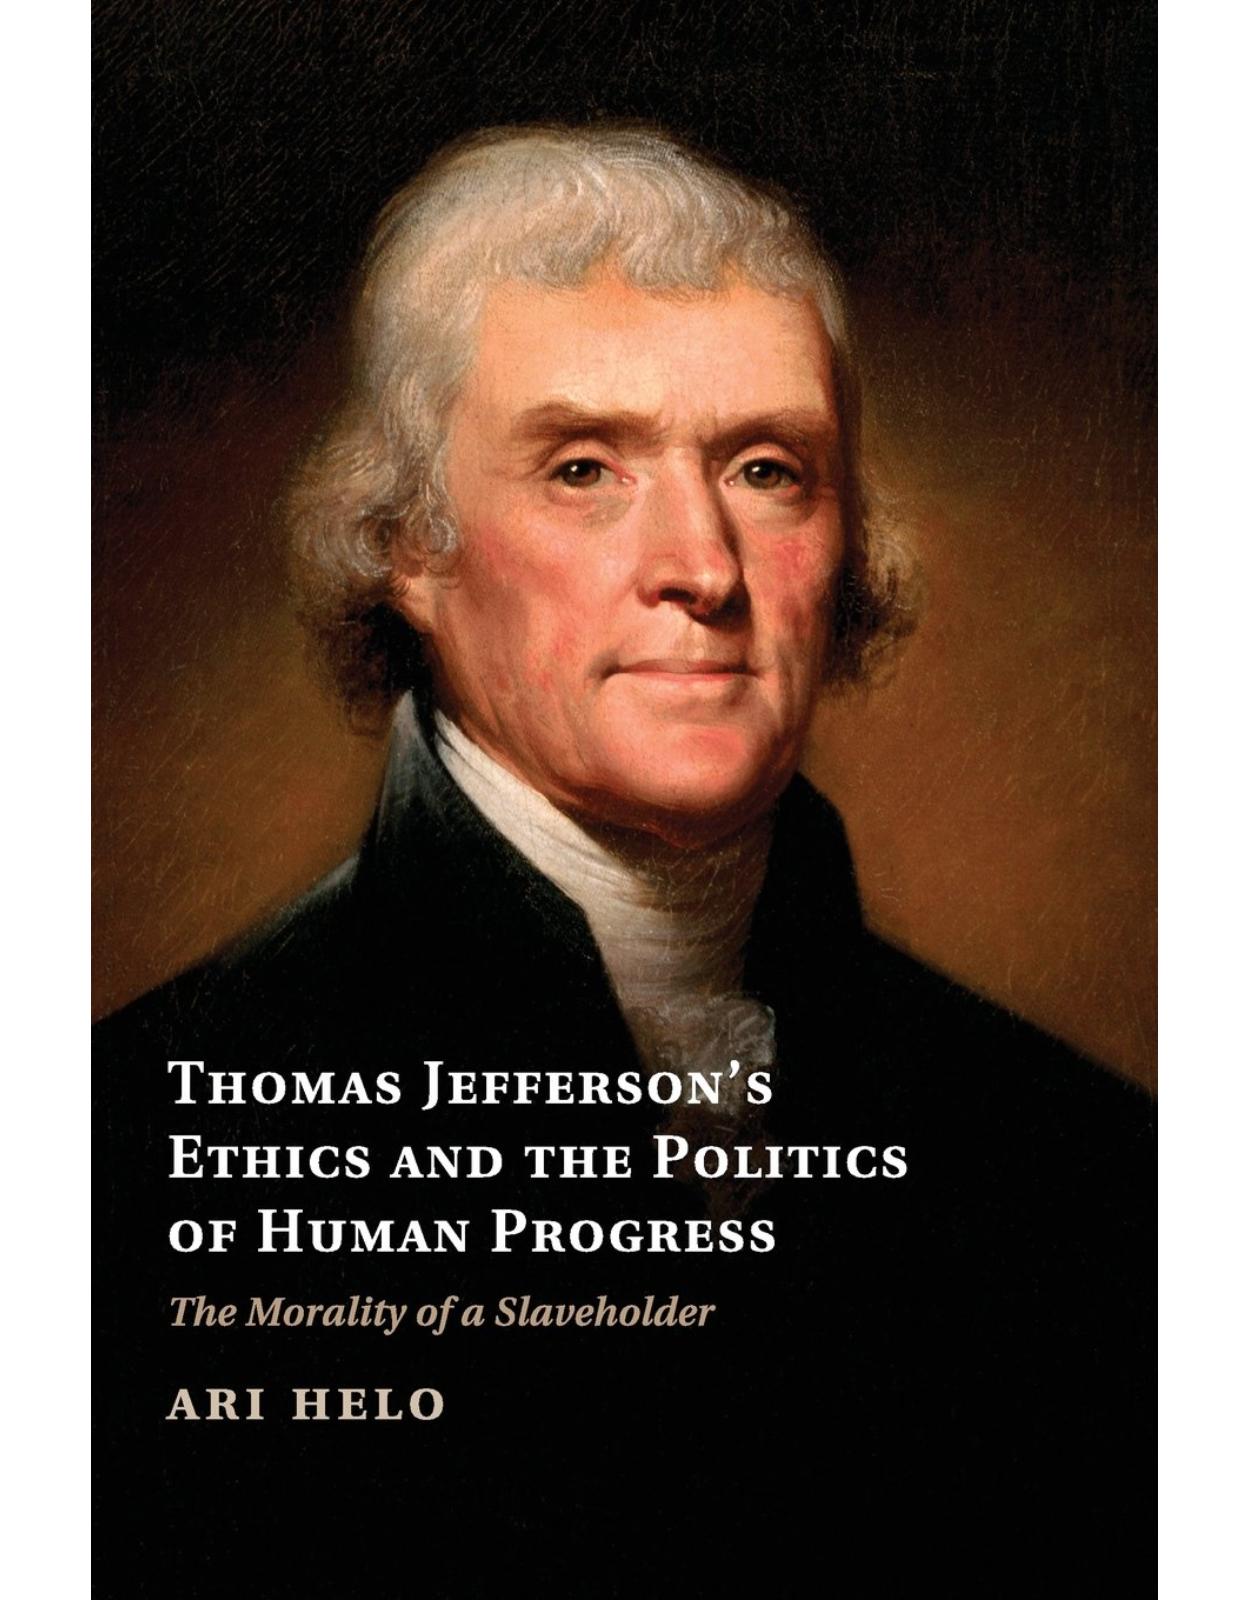 Thomas Jefferson's Ethics and the Politics of Human Progress: The Morality of a Slaveholder (Cambridge Studies on the American South)